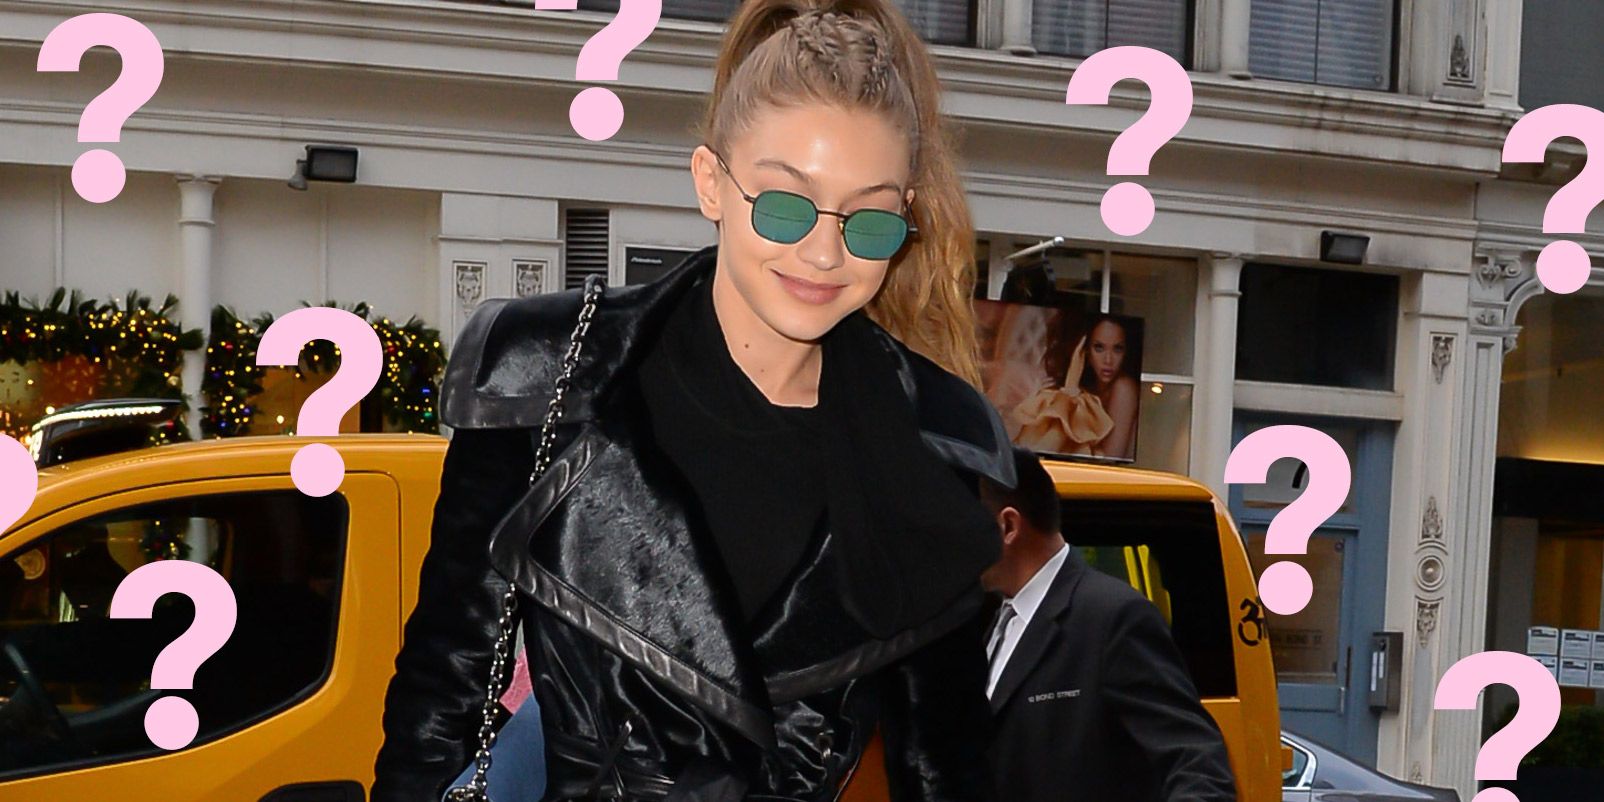 Gigi Hadid spotted with multiple Victoria's Secret shopping bags